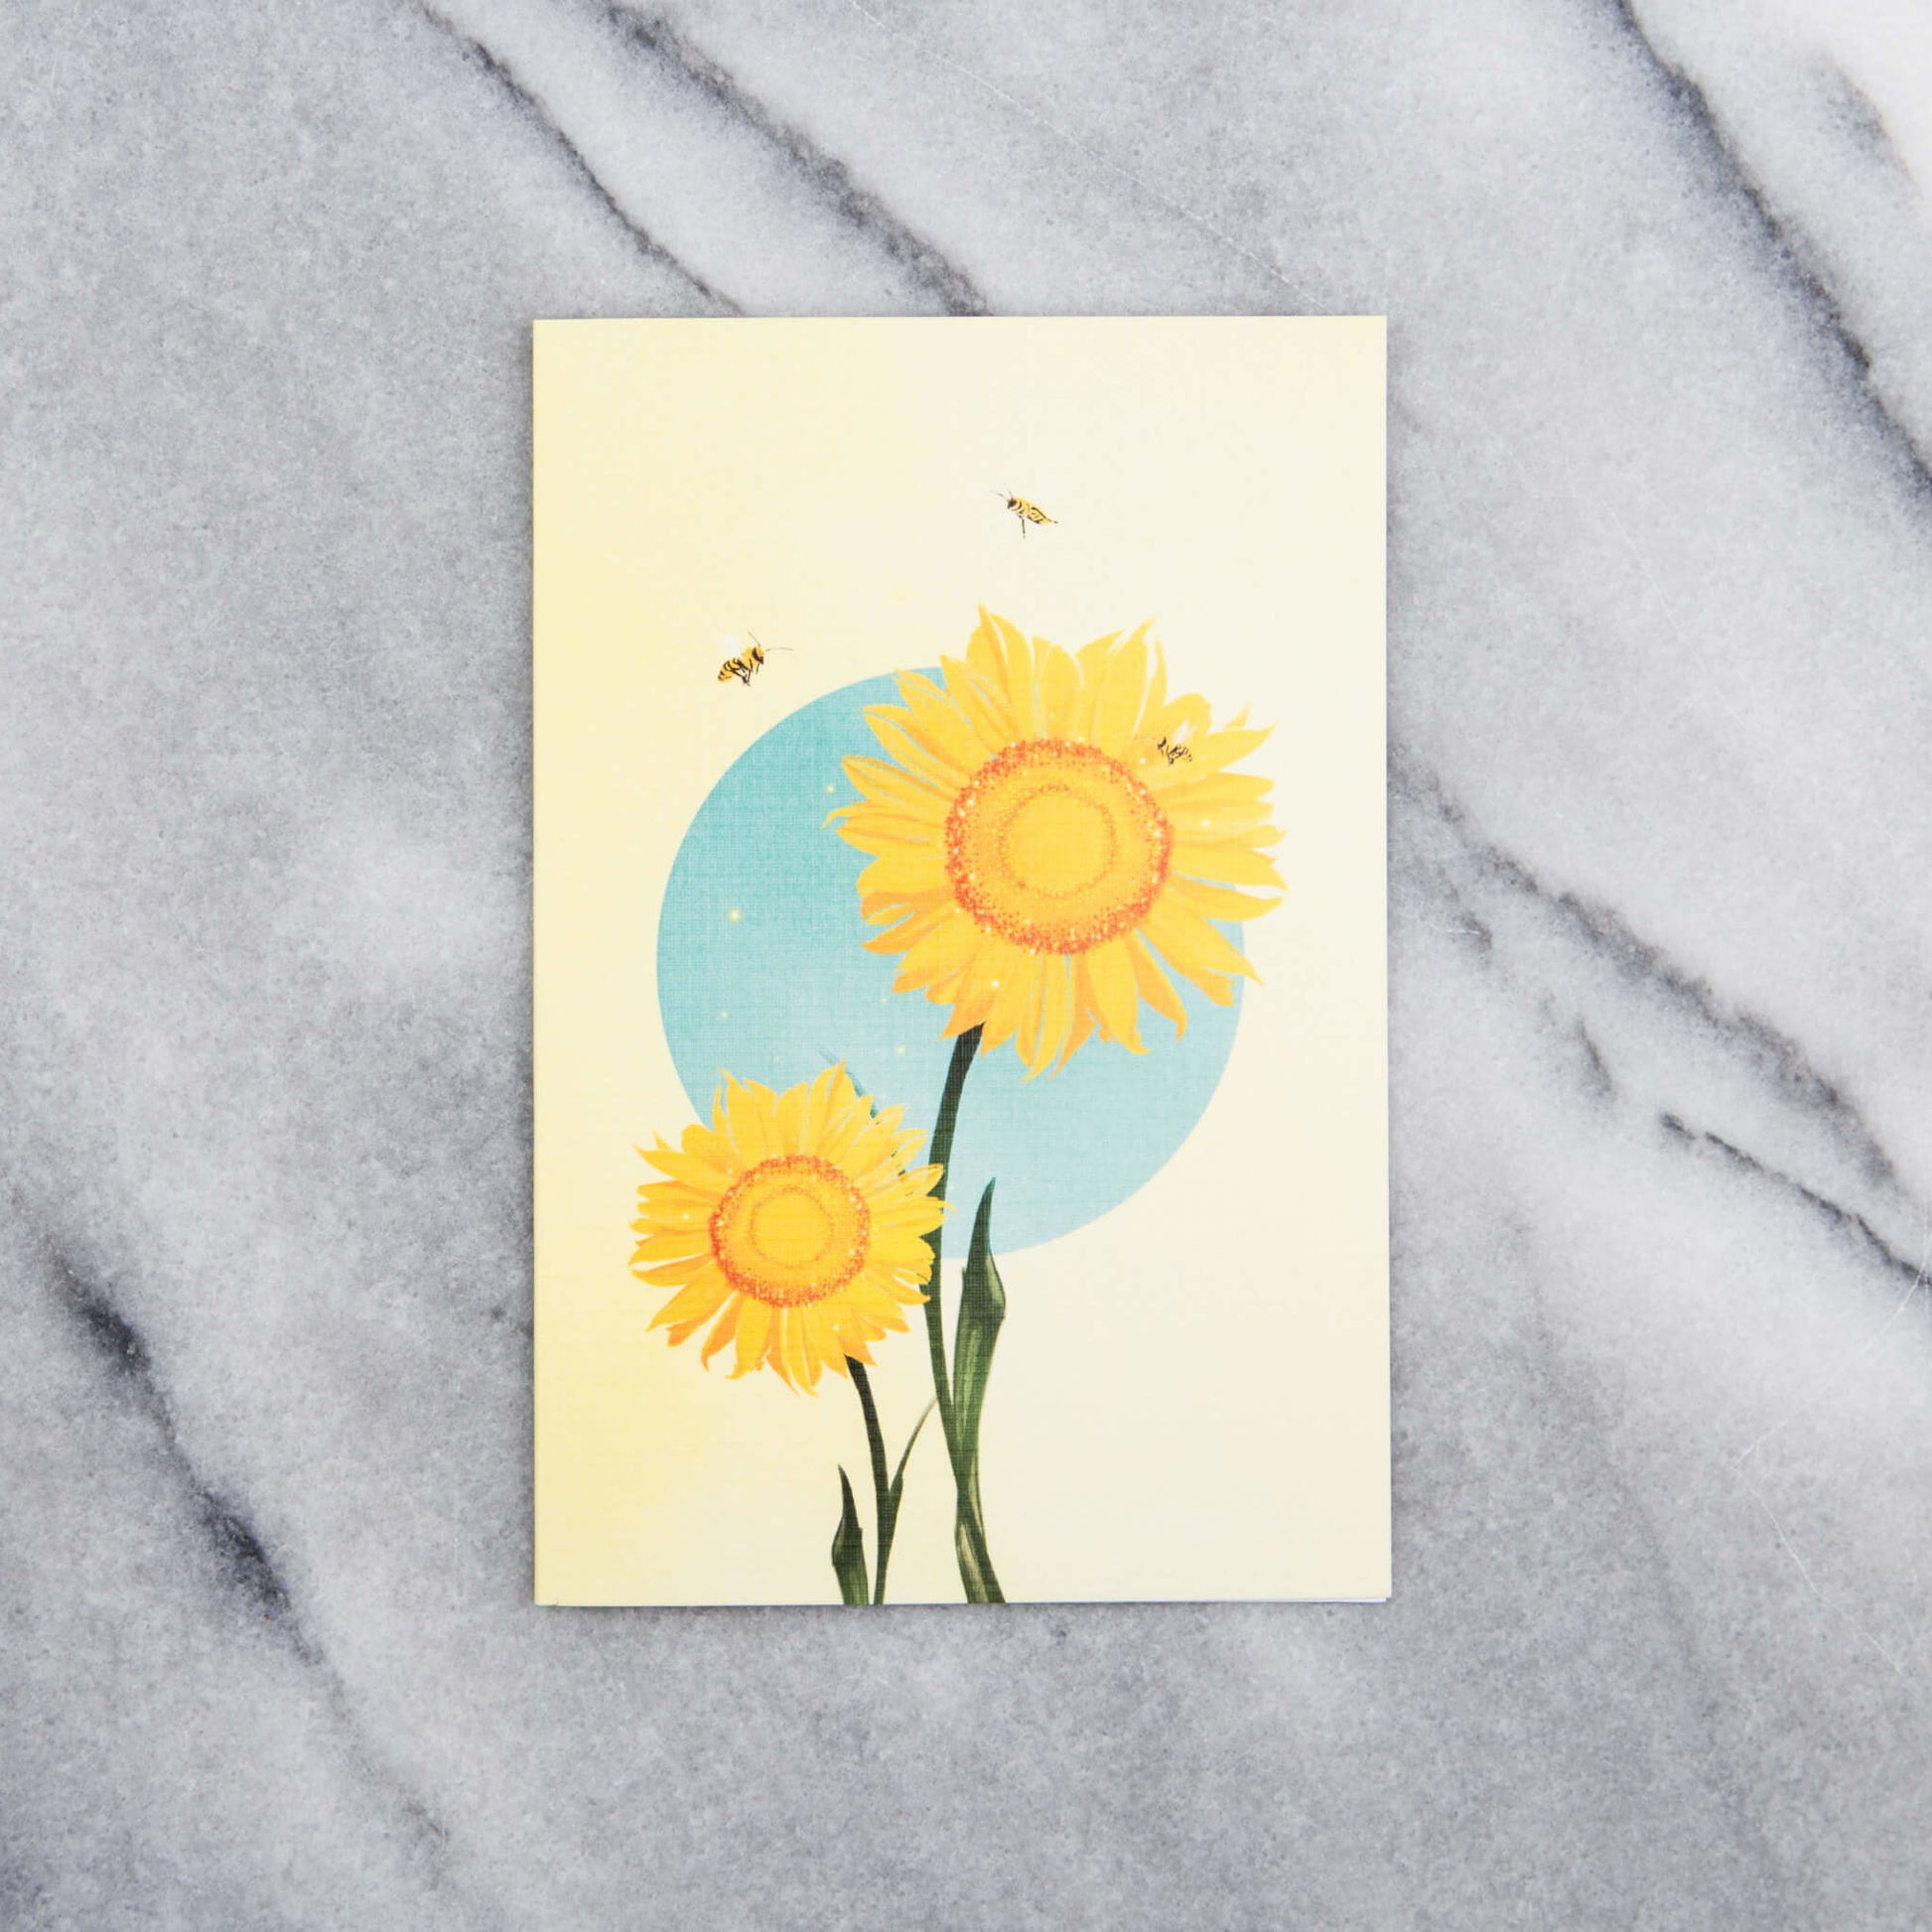 Greeting card with sunflowers and honeybees on yellow background